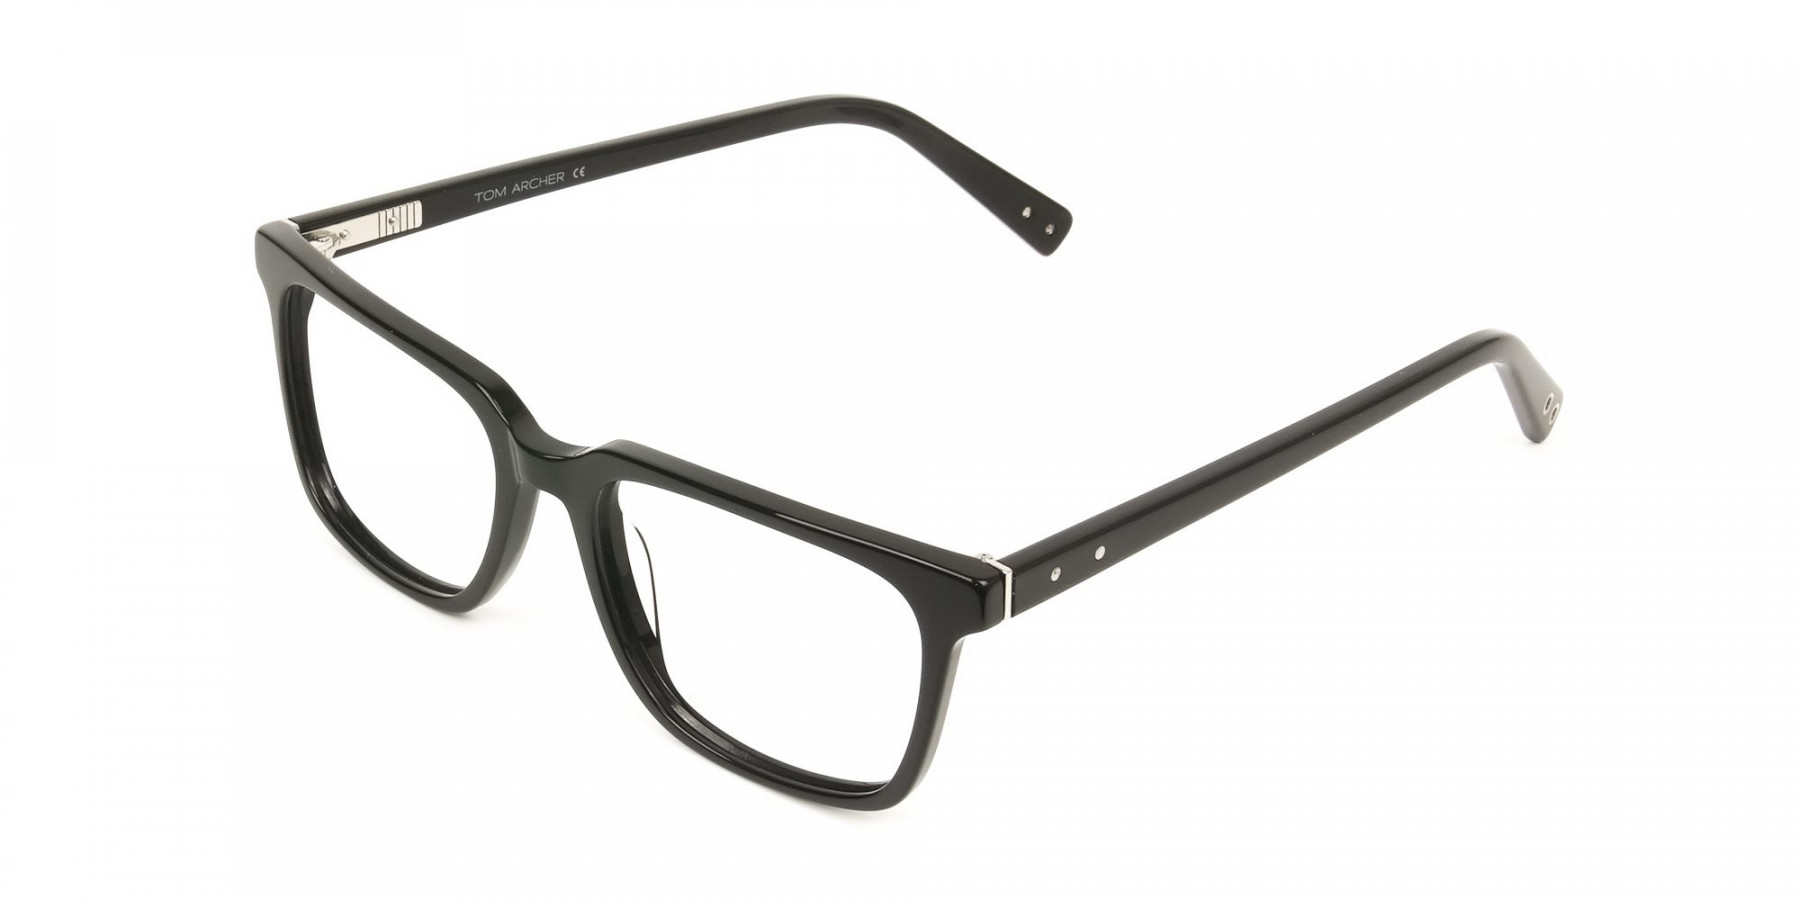 Handcrafted Black Thick Acetate Glasses in Rectangular - 1